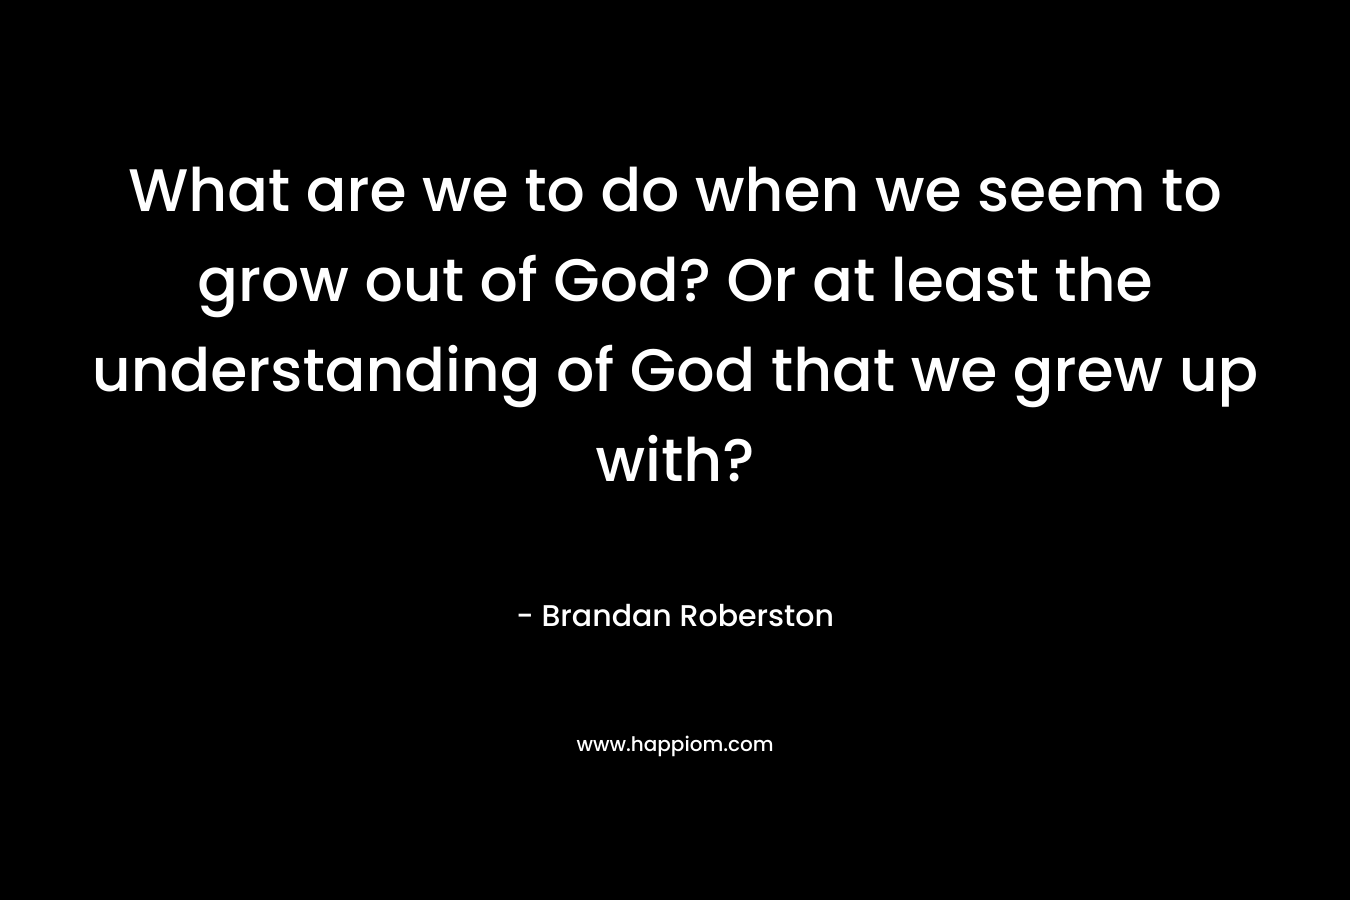 What are we to do when we seem to grow out of God? Or at least the understanding of God that we grew up with? – Brandan Roberston